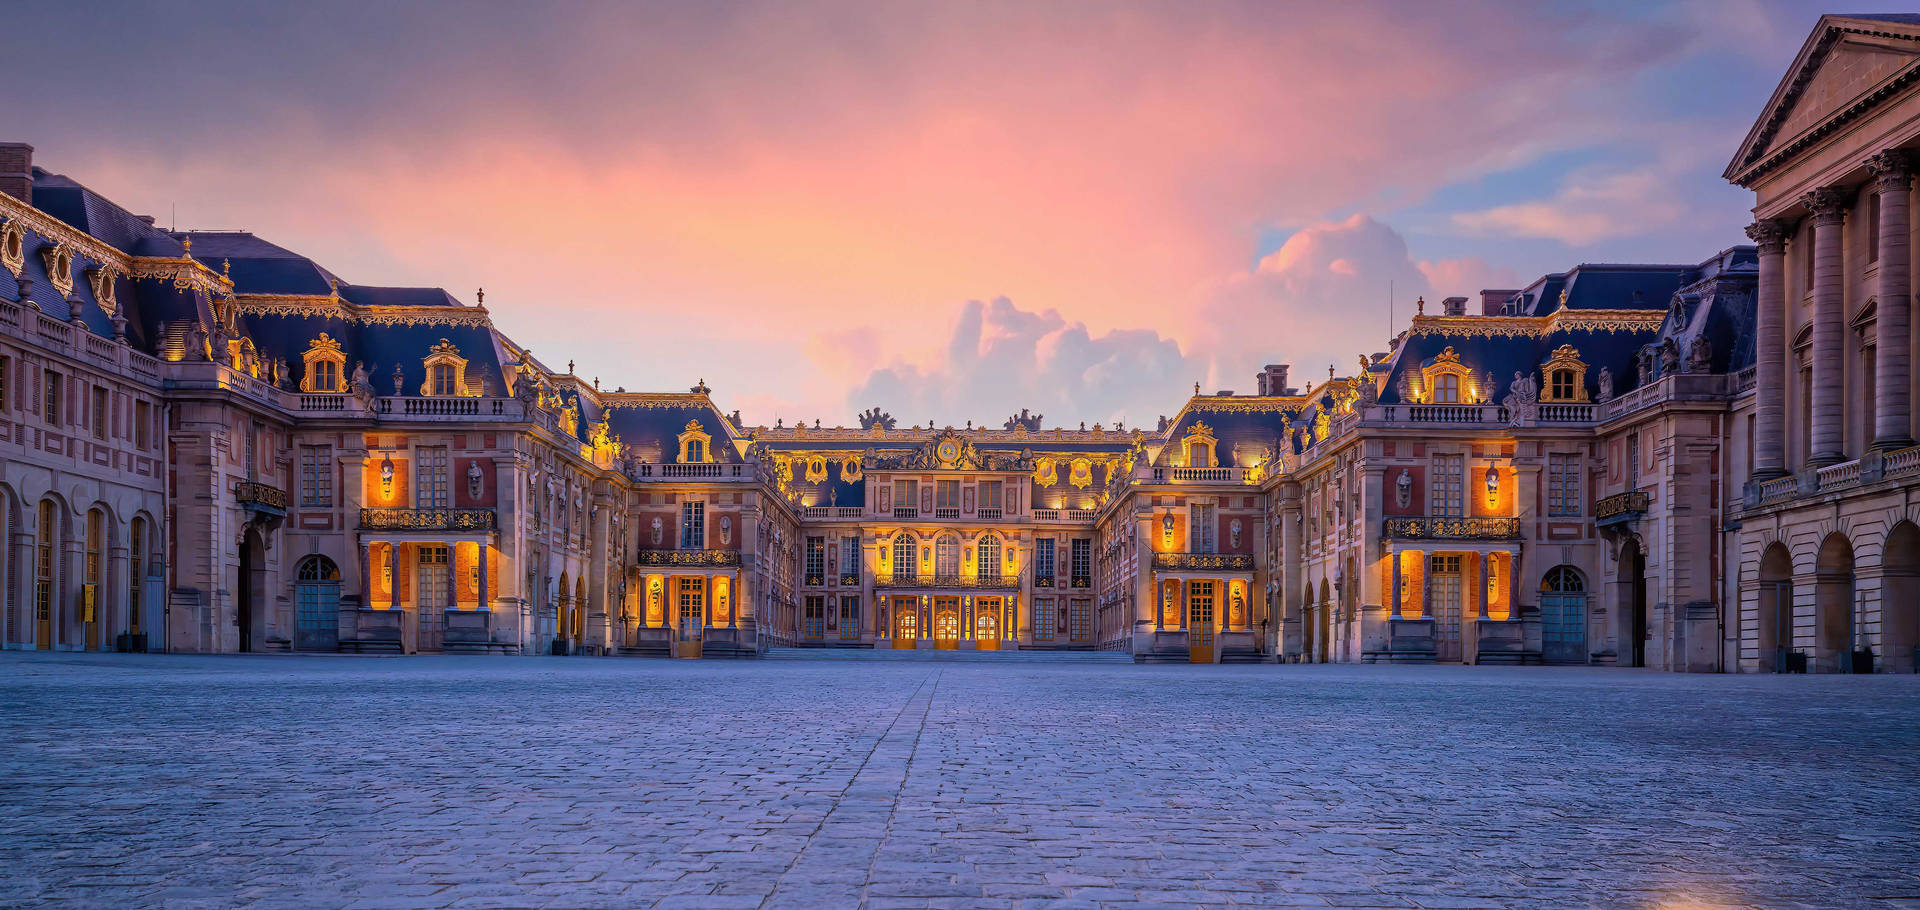 Sunset At The Marble Courtyard At The Palace Of Versailles Wallpaper